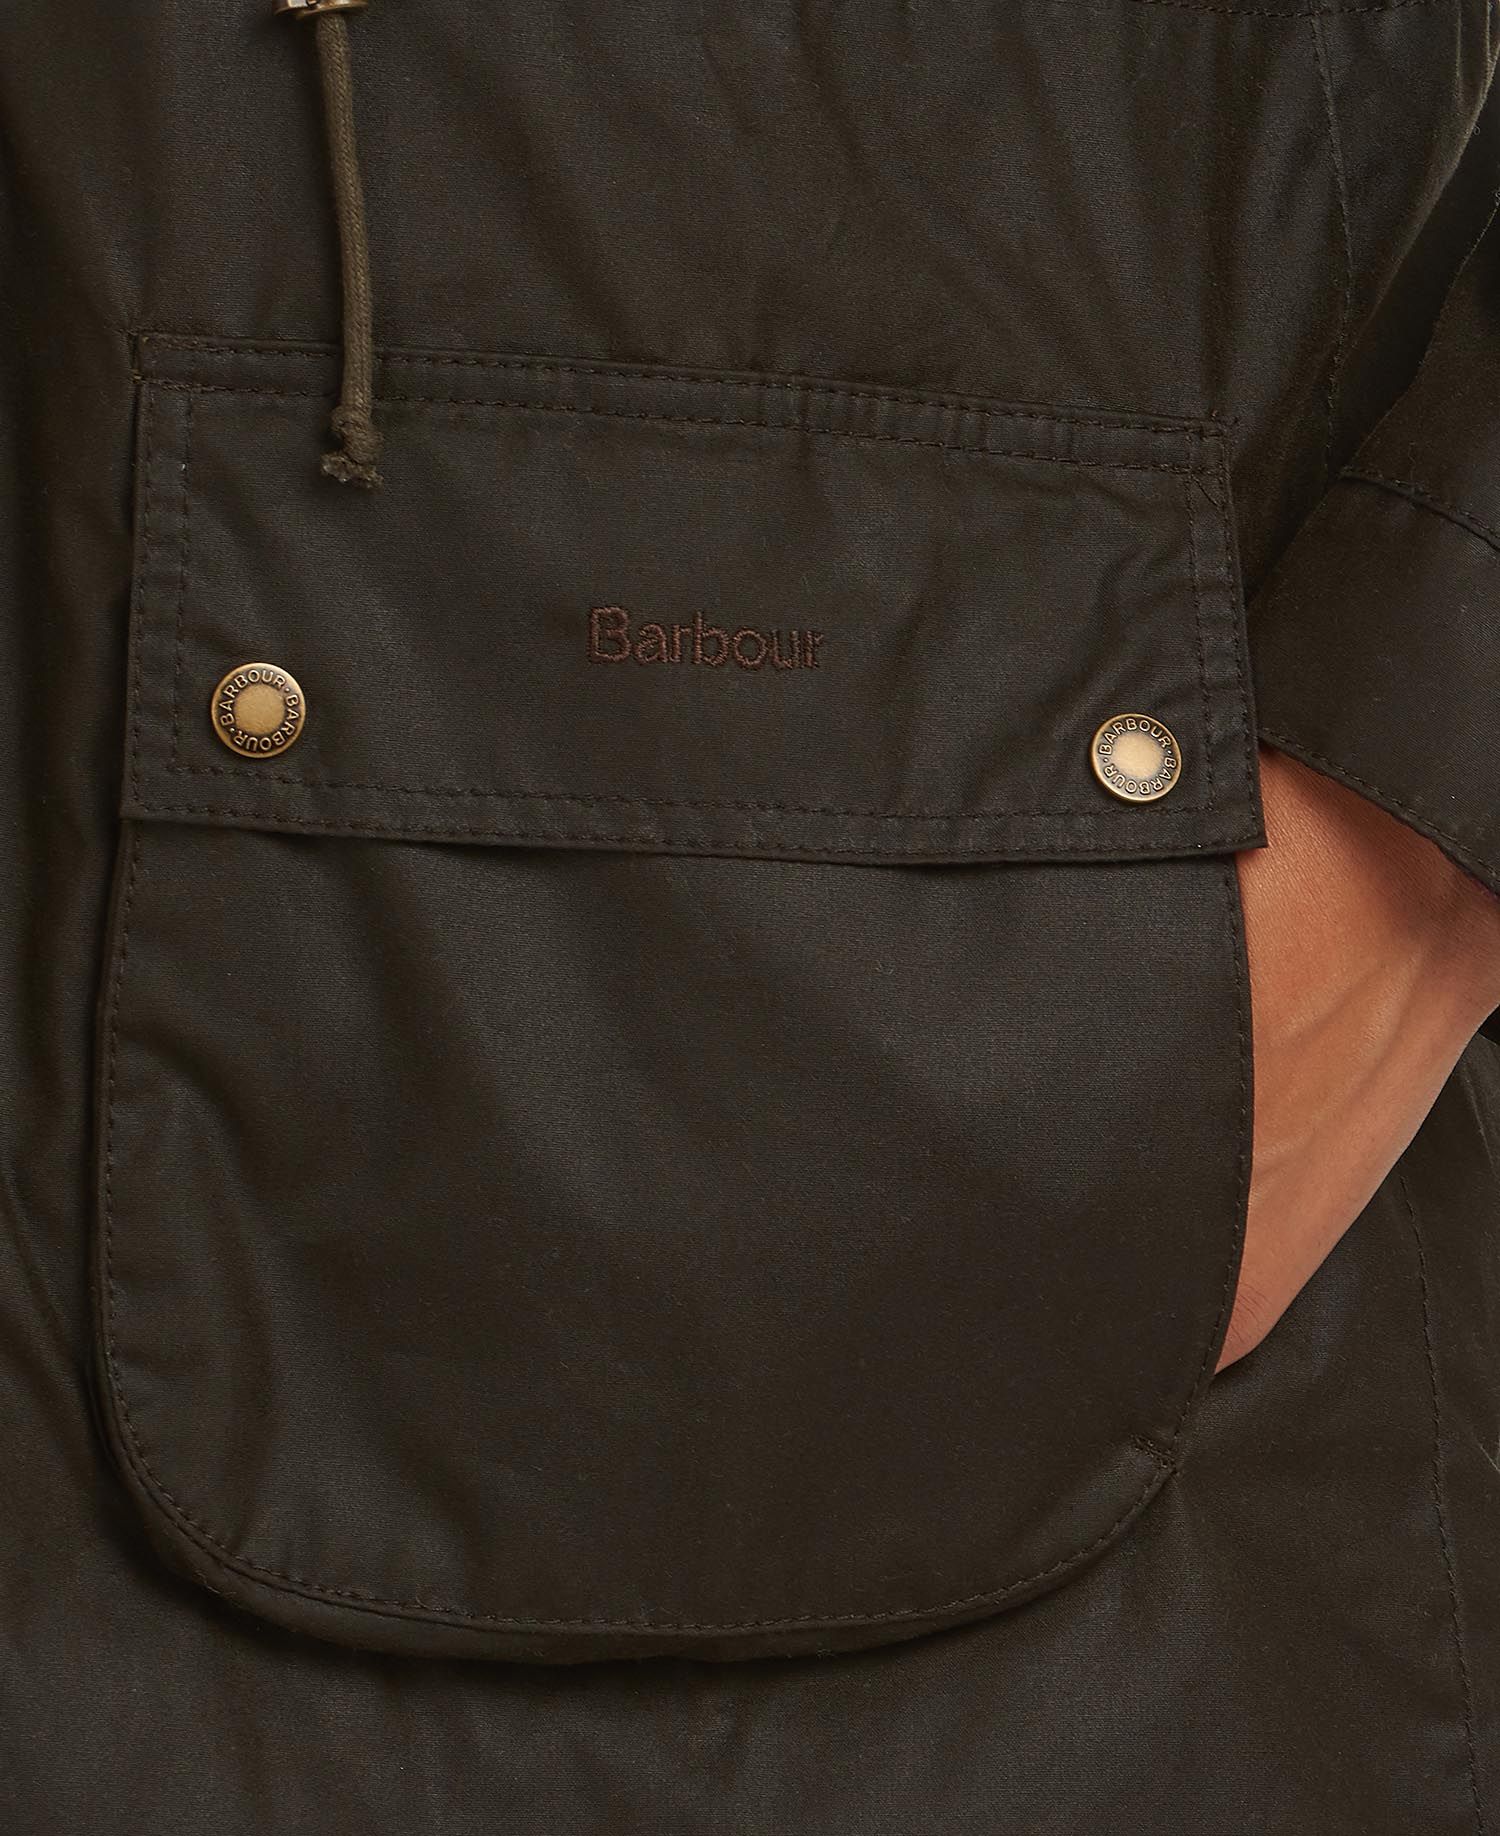 BARBOUR OLIVE MULL WAXED COTTON JACKET - Aston Bourne